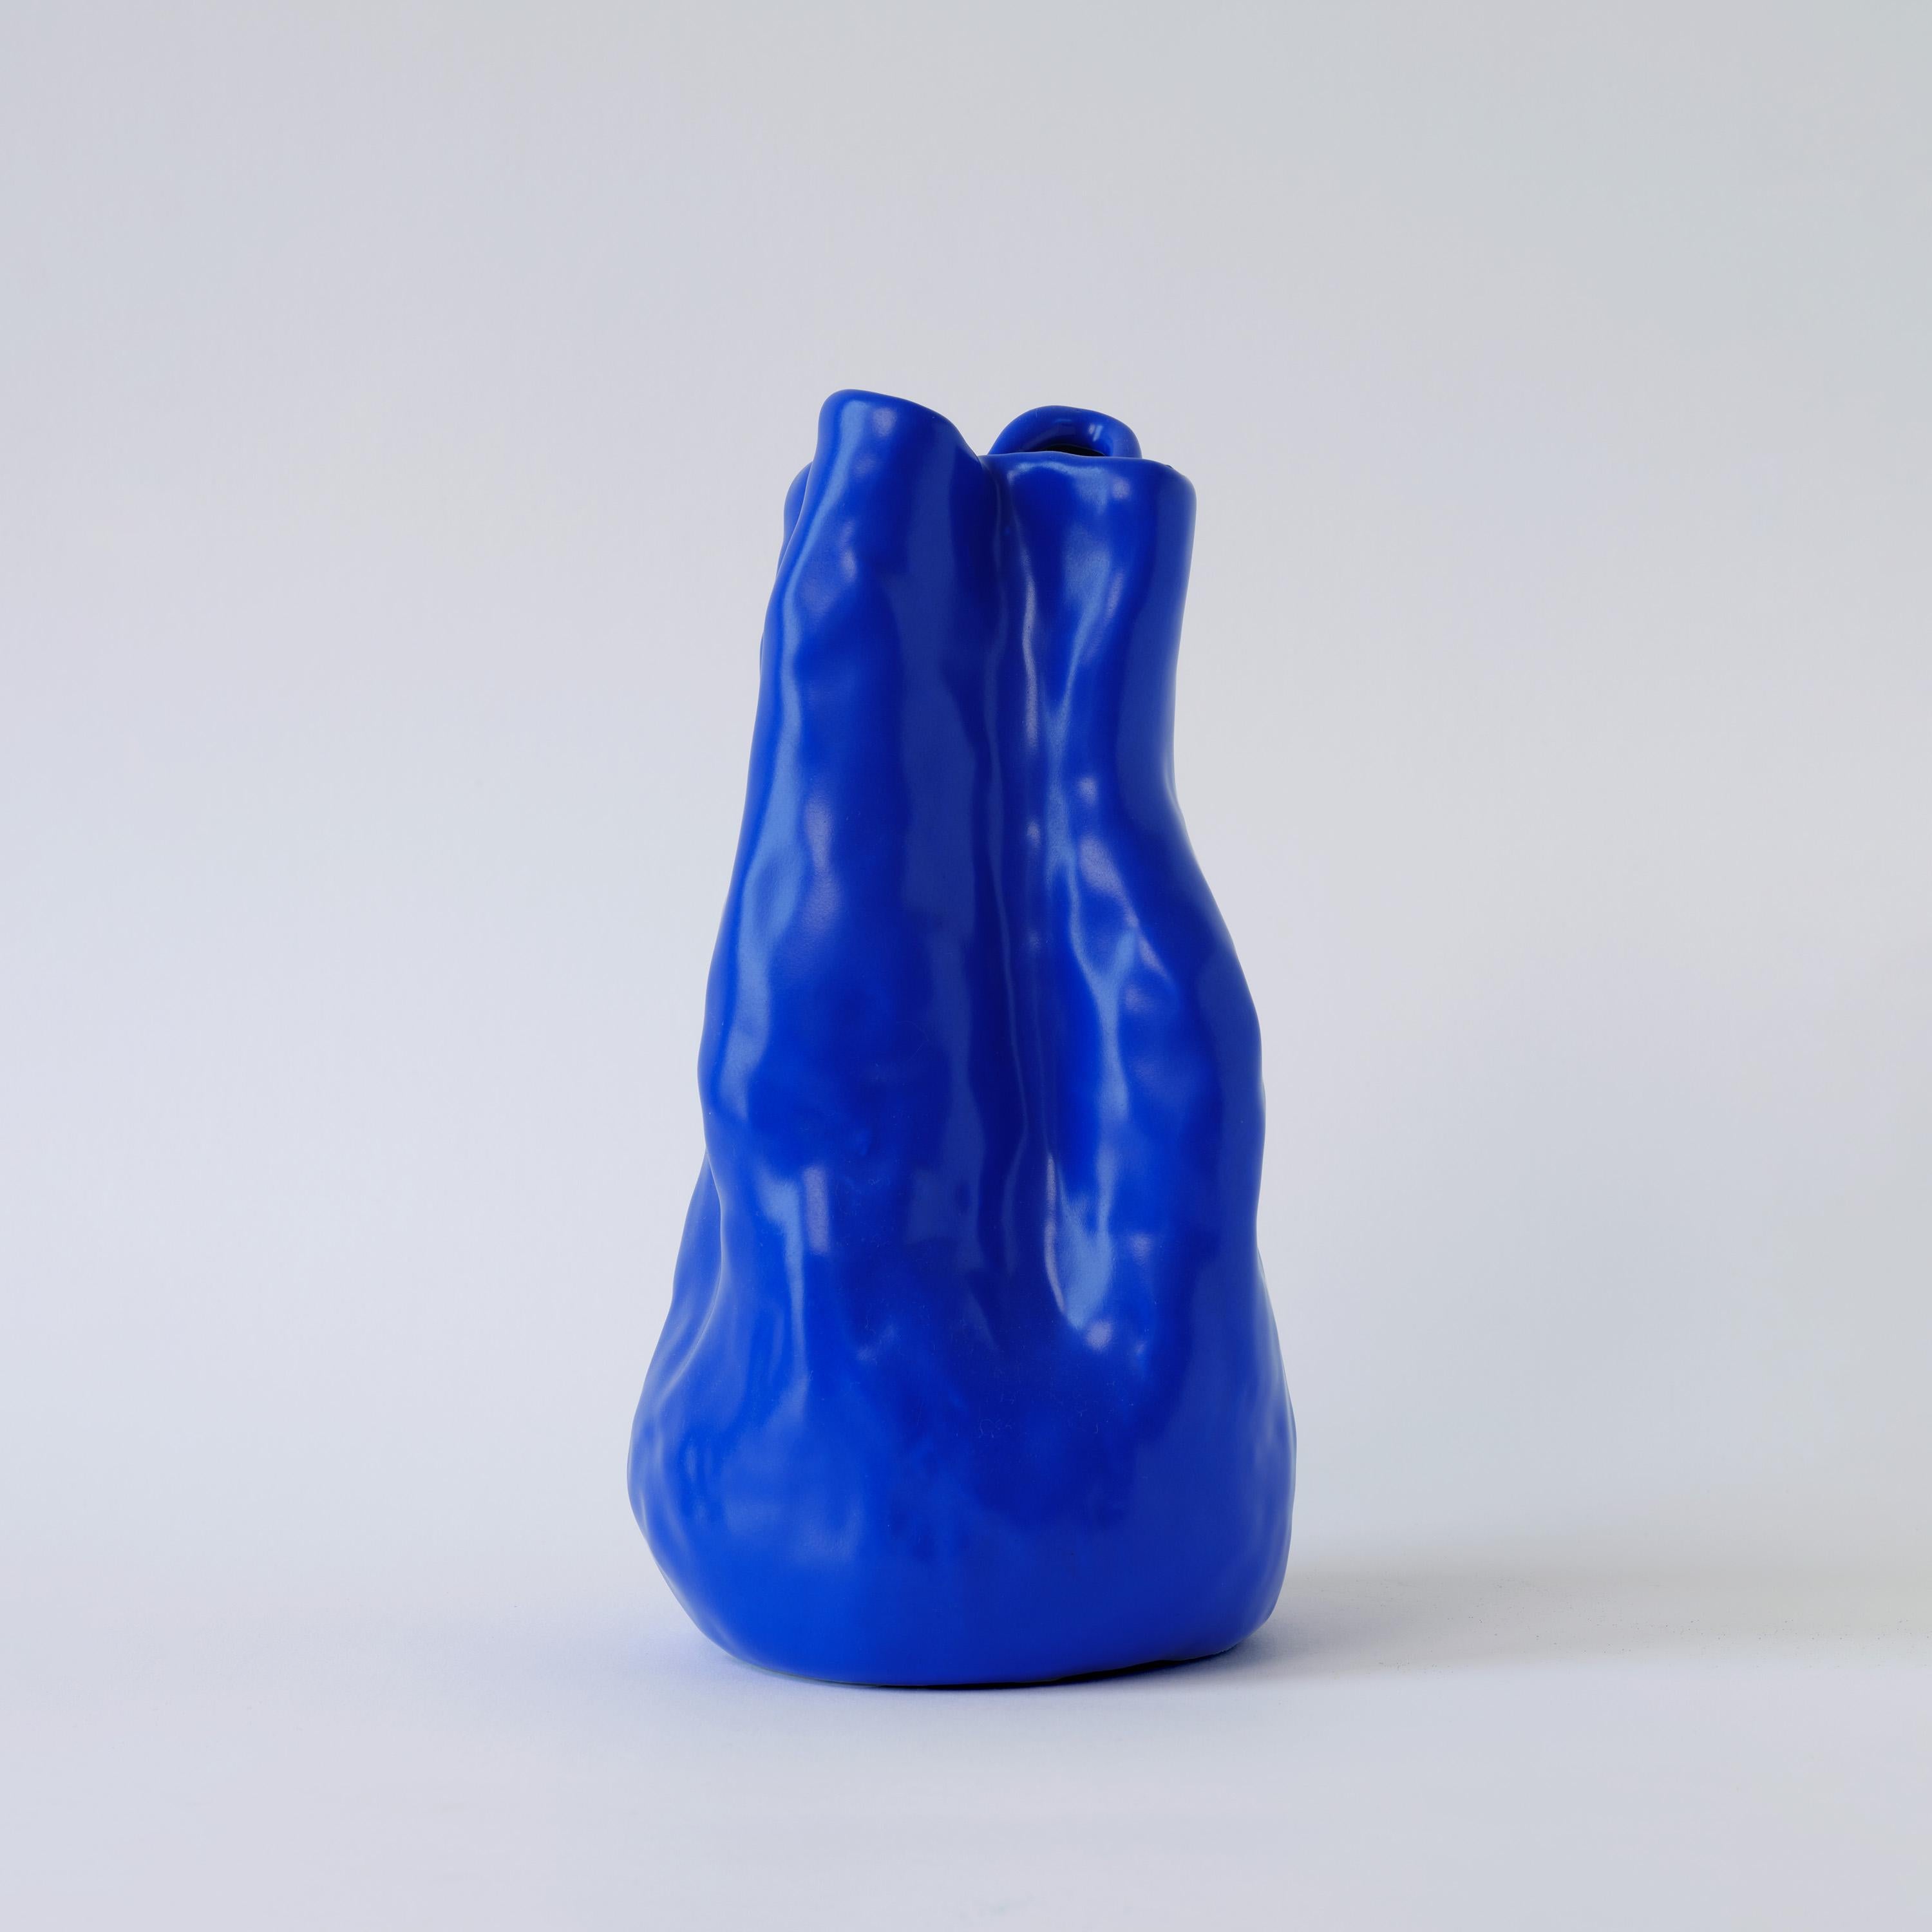 Crafted from fine china porcelain, the Georgia vase radiates a vibrant blue hue and boasts a one-of-a-kind shape, embodying the daring ingenuity of Yves Klein's artistic vision. This unmistakable statement piece infuses any space with a lively,